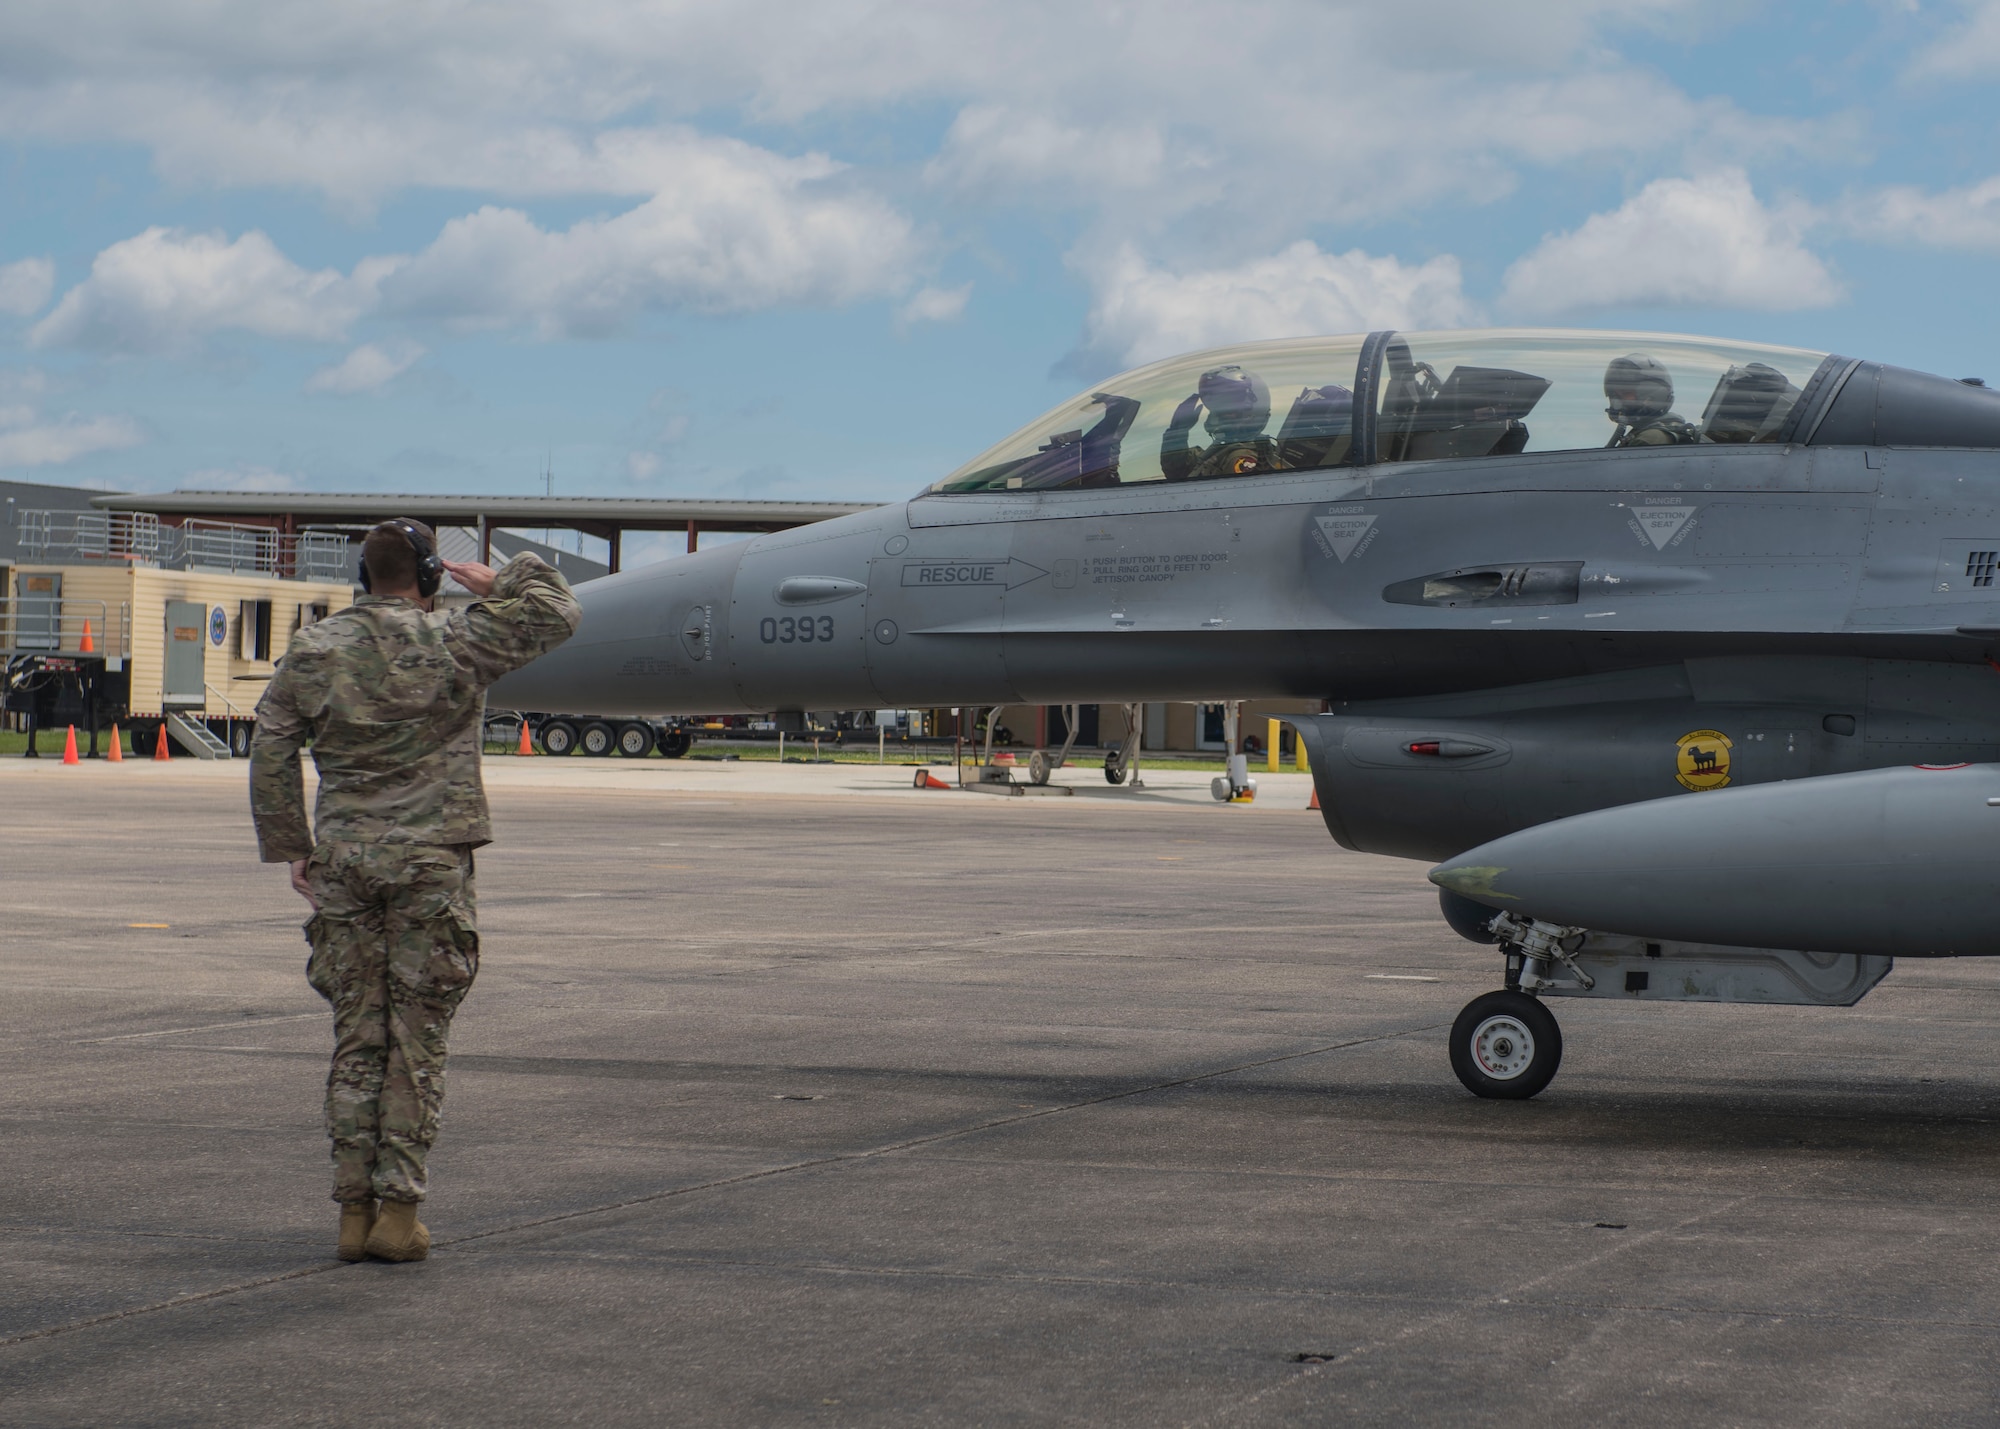 U.S. Air Force Master Sgt. Ryan Gentry salutes an F-16 pilot before a familiarization flight, April 9, 2019, Naval Air Station Joint Reserve Base New Orleans, La., and participated in a training exercise, March 29 to April 12, 2019. Many personnel were given the opportunity to go on a FAM flight in the back of an F-16 D-model during the temporary duty assignment. (U.S. Air Force photo by Airman 1st Class Kindra Stewart)